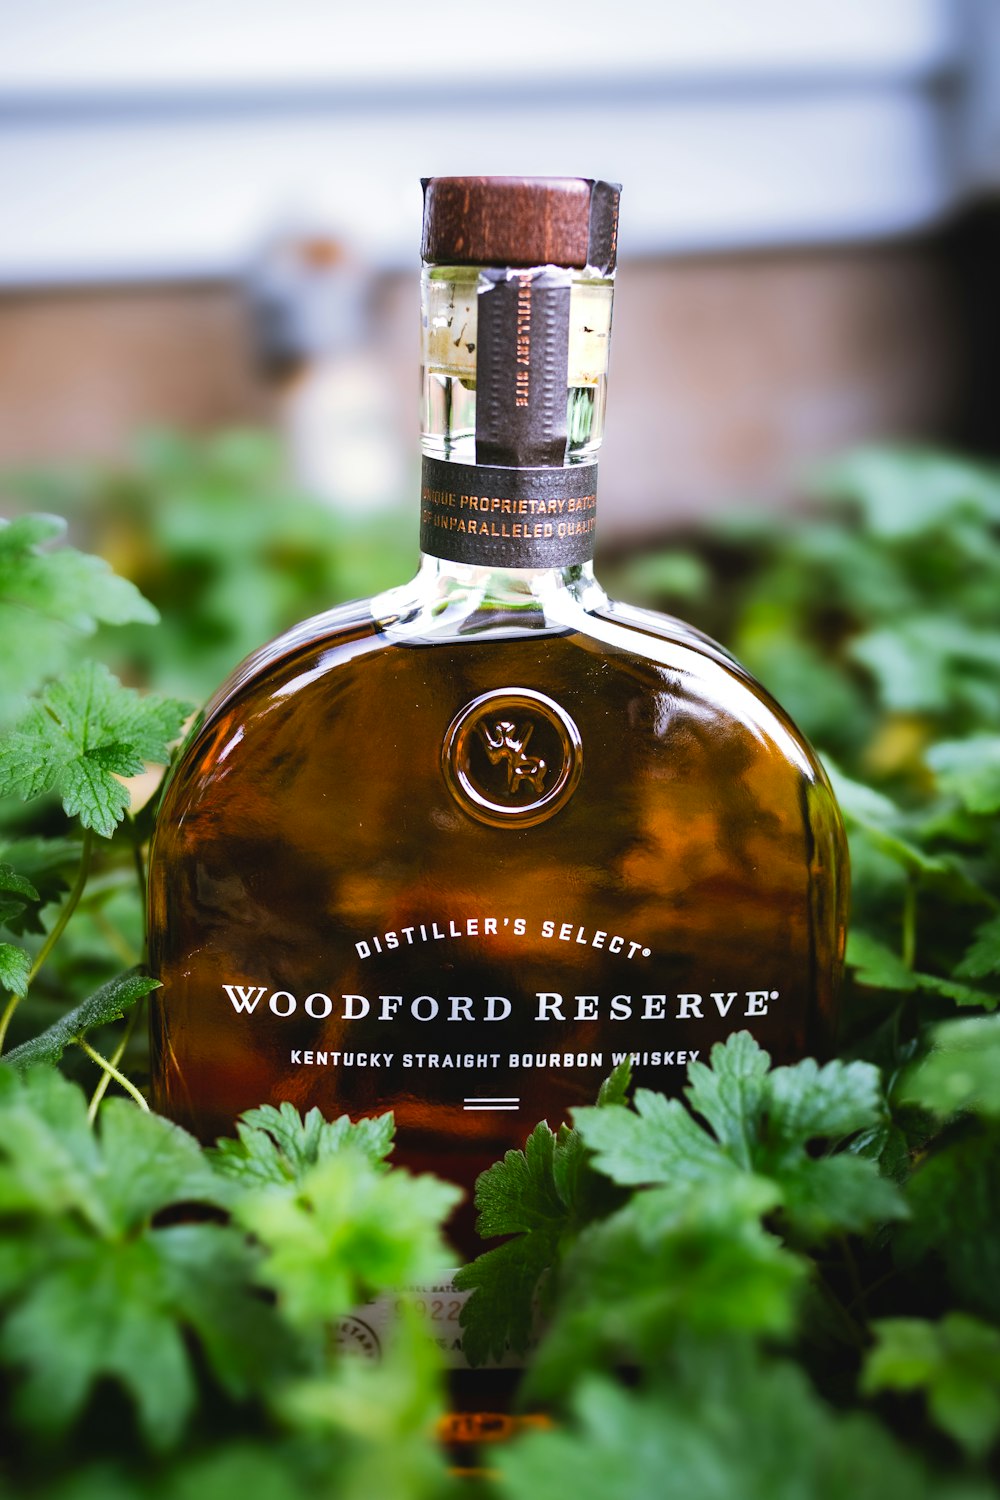 a bottle of woodford reserve sitting in the grass